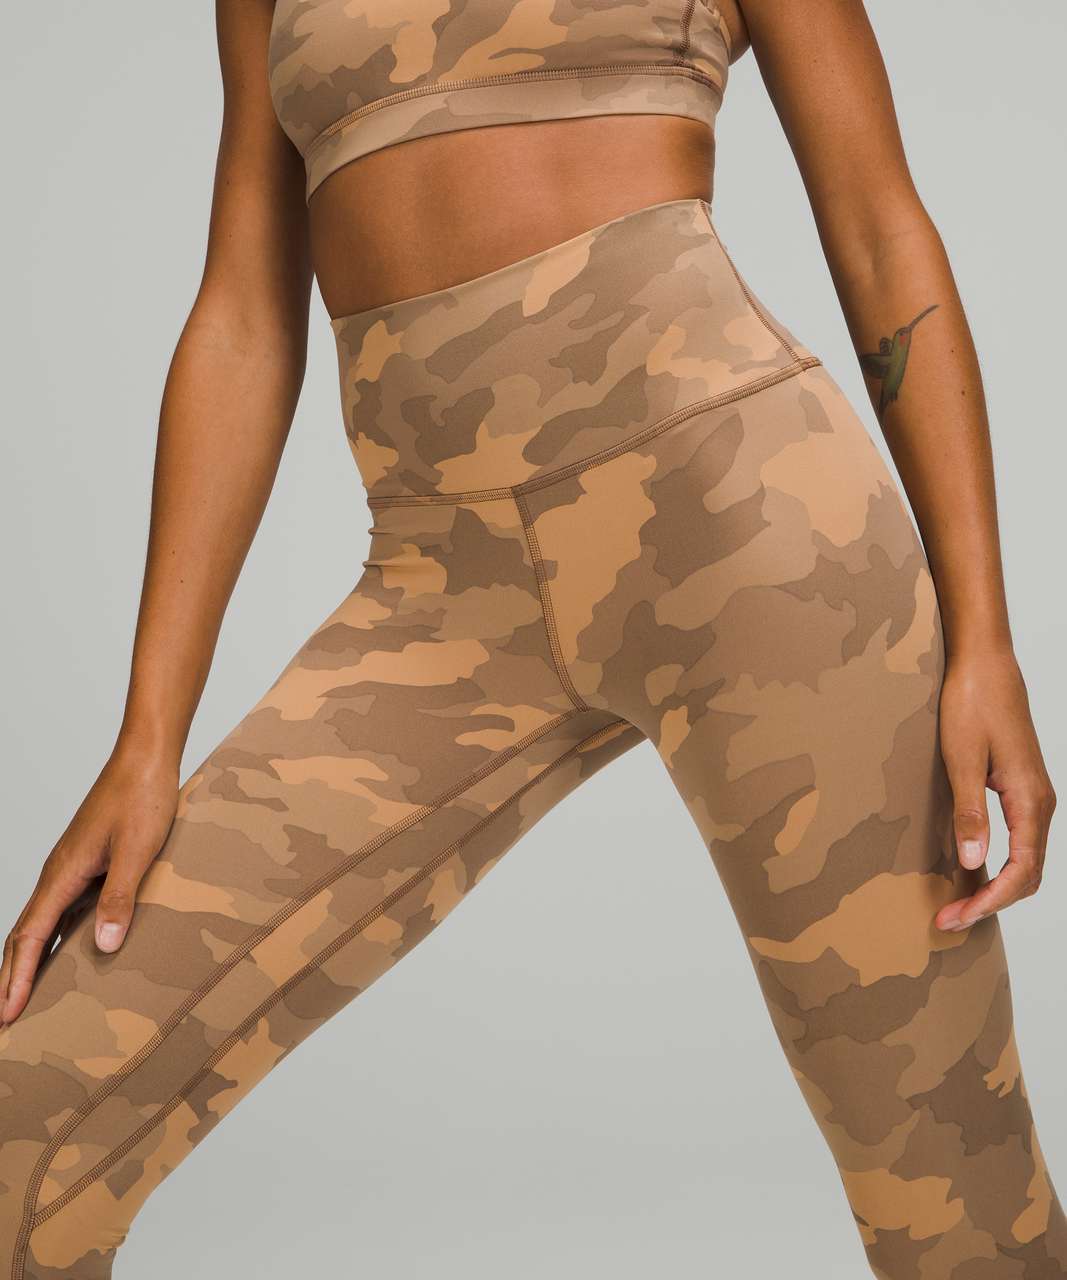 Lululemon Align High-Rise Pant Legging 25 7/8 Length Heritage 365 Camo  Beige Multi Tan Brown Size 20 - $75 (23% Off Retail) New With Tags - From  Jenna